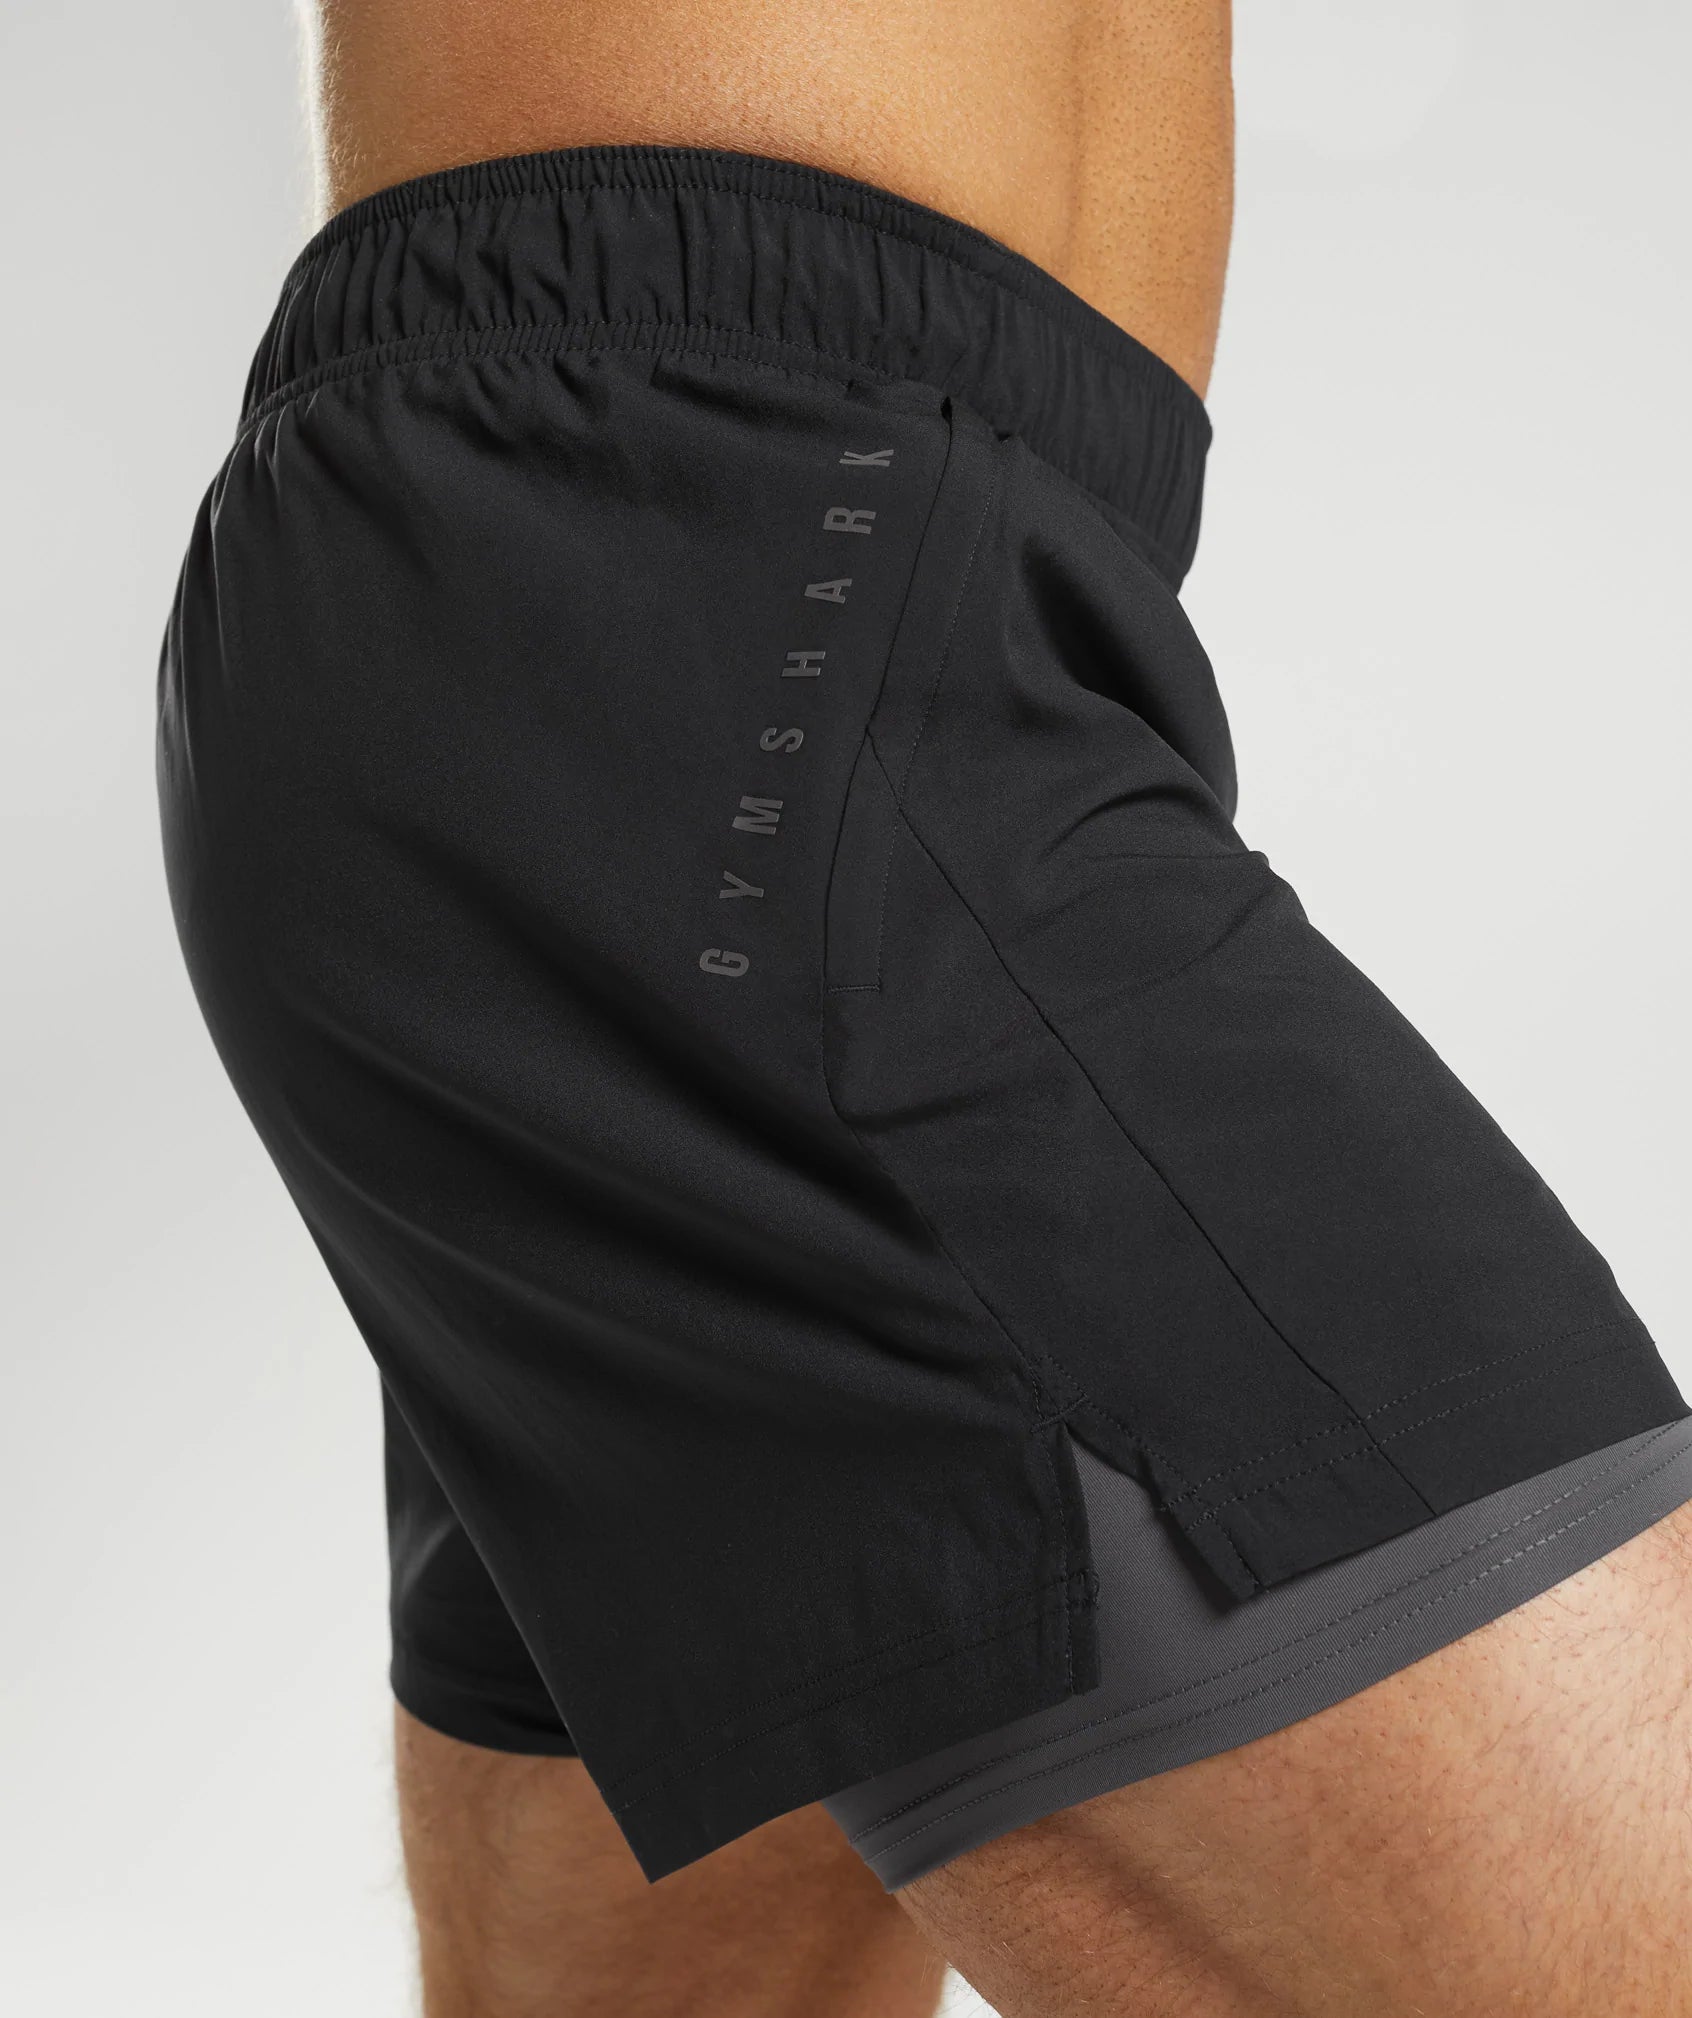 Sport 5" 2 In 1 Shorts in Black/Silhouette Grey - view 6